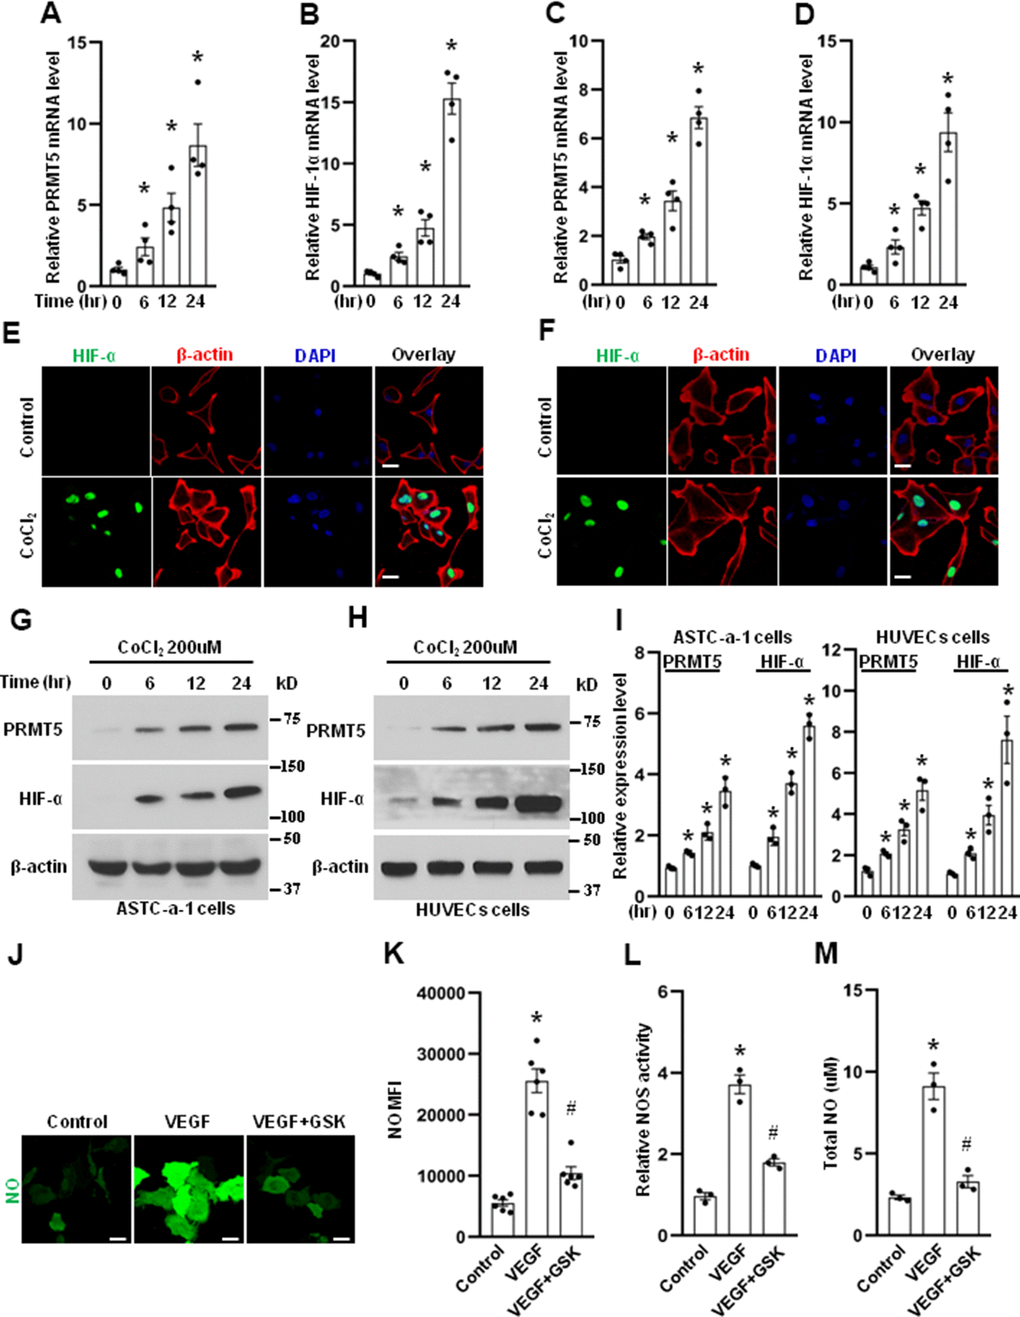 PRMT5 is induced by hypoxia. The HUVECs (A, B) and ASTC-a-1 cells (C, D) were treated with CoCl2 (200μM) for indicated time points, and the mRNA expression levels of PRMT5 and HIF-1α were measured by qRT-PCR. *P E) and ASTC-a-1 cells (F) were treated with or without CoCl2 (200μM) for 12h, and the HIF-1α expression induced by CoCl2 was detected by immunofluorescence staining. Representative pictures were shown. Green= HIF-1α; Red=β-actin; Blue=DAPI. Scale Bar=50μm. The ASTC-a-1 cells (G) and HUVECs (H) were treated with CoCl2 (200μM) for indicated time points, and the protein expression levels of PRMT5 and HIF-α were evaluated by Western blotting. (I) PRMT5 and HIF-α protein expression levels were quantified in ASTC-a-1 and HUVECs cells (n=3). *P J) The HUVECs were treated with VEGF (50ng/ml) in the presence or absence of GSK591, and the endothelial NO was monitored by the DAF-FM DA probe. Scale bar=50μm. (K) Quantitation of corresponding MFI values (n=6, each group). *P #P L) NOS enzymatic activity in HUVECs upon treatment of VEGF with or without GSK591 as evaluated by the Griess method. *P #P M) Total NO was measured by ELISA kit using the Griess reaction in the supernatant of HUVECs upon treatment of VEGF (50ng/ml) with or without GSK591. *P #P 